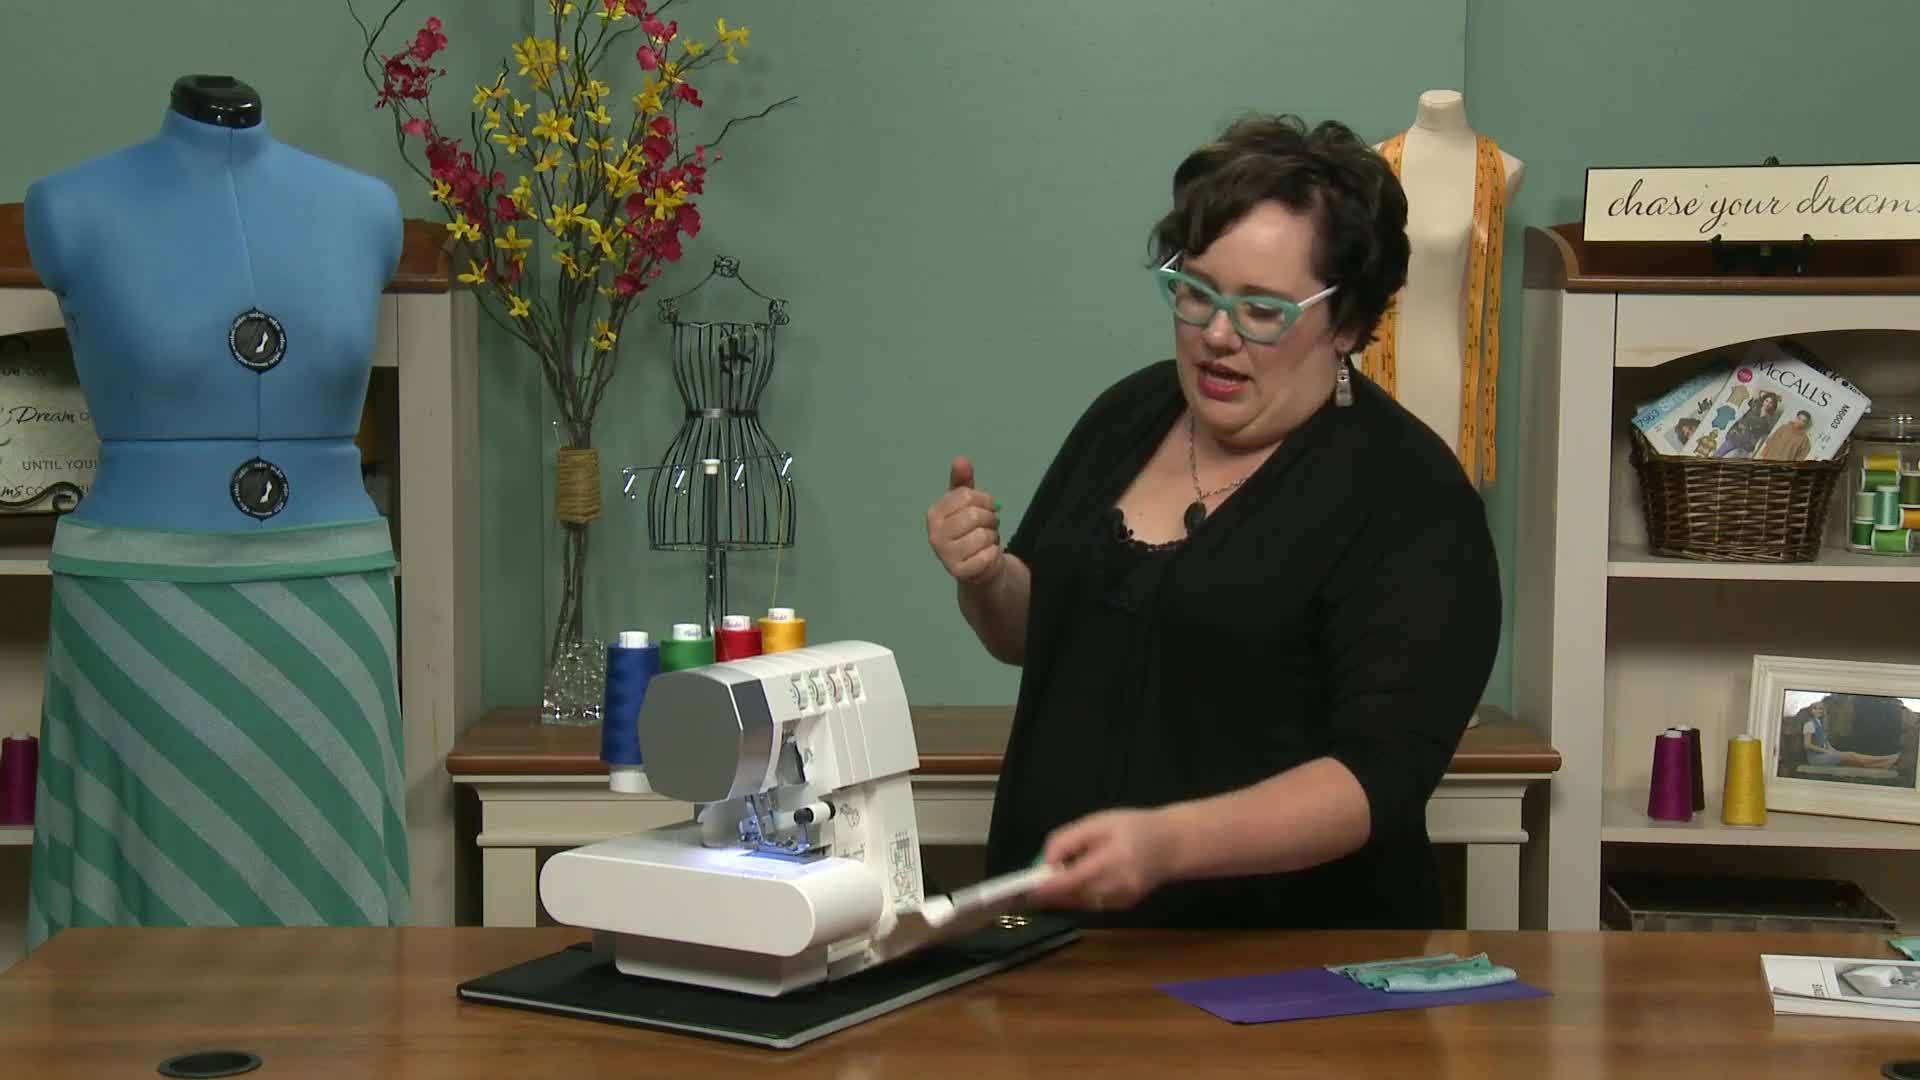 Session 7: Serging Knit Fabric